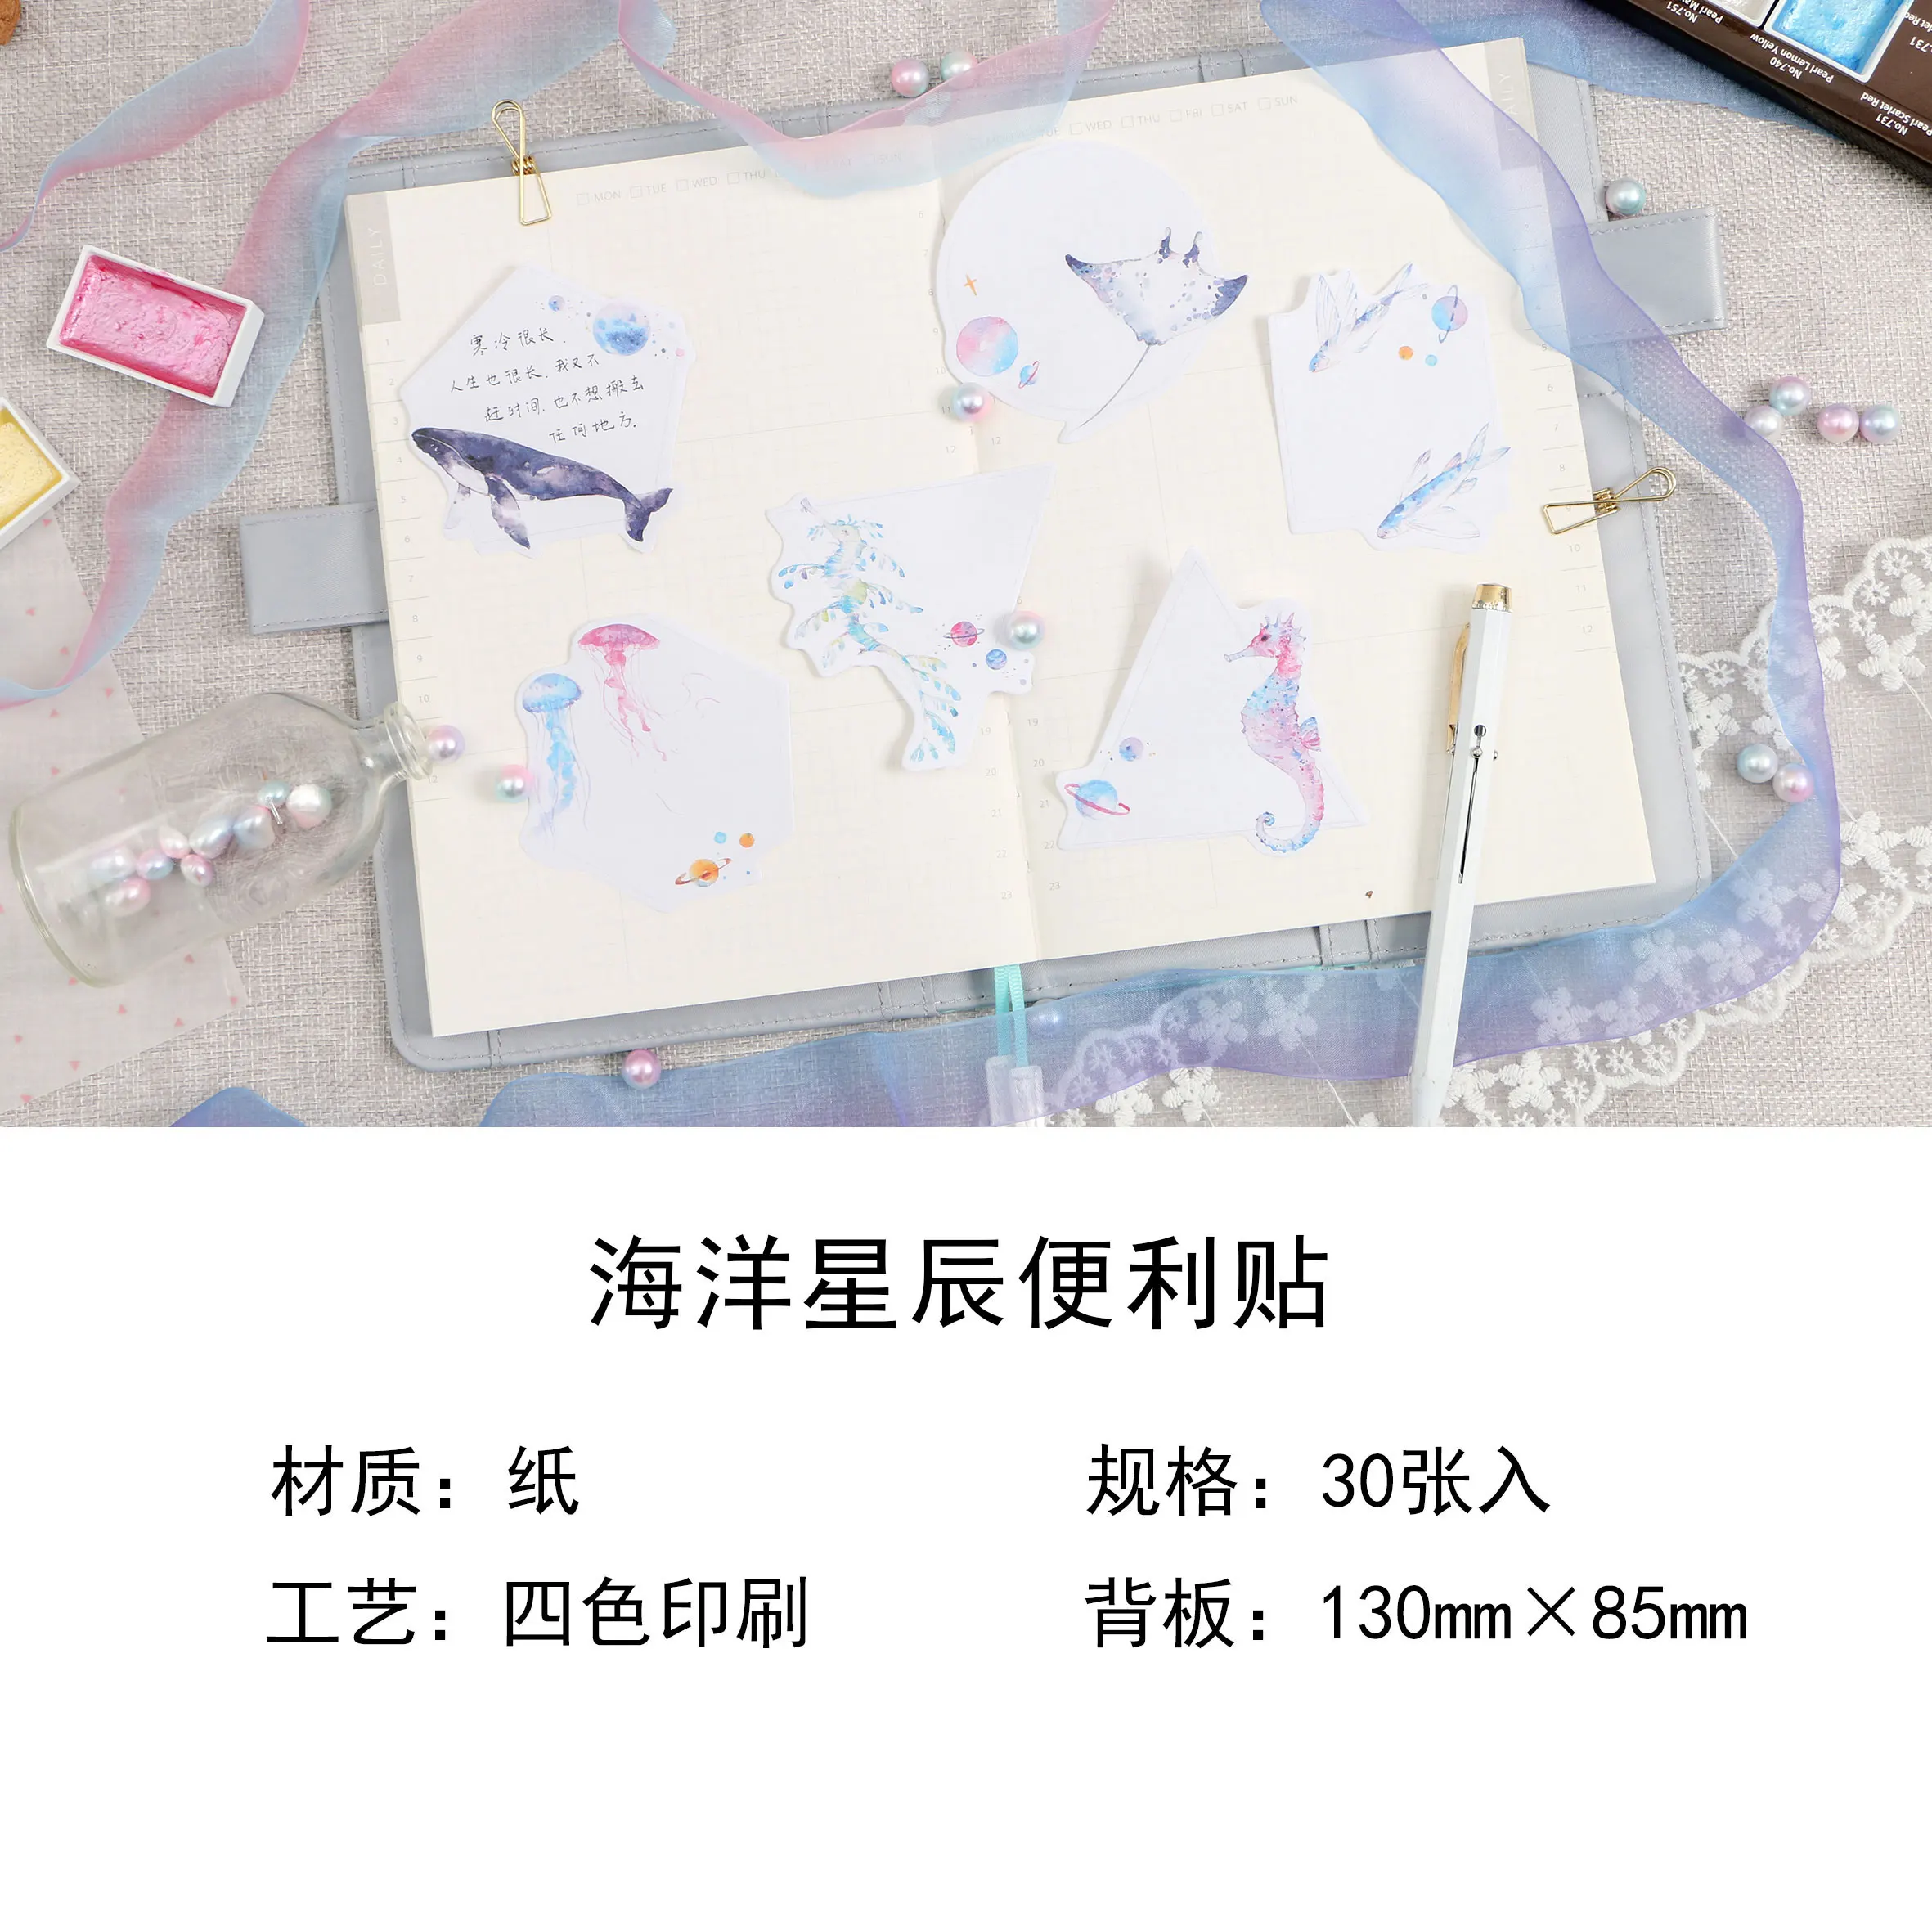 

30 Sheets Planet Ocean Collection Memo Pad N Times Sticky Notes Escolar Papelaria School Supply Bookmark Label